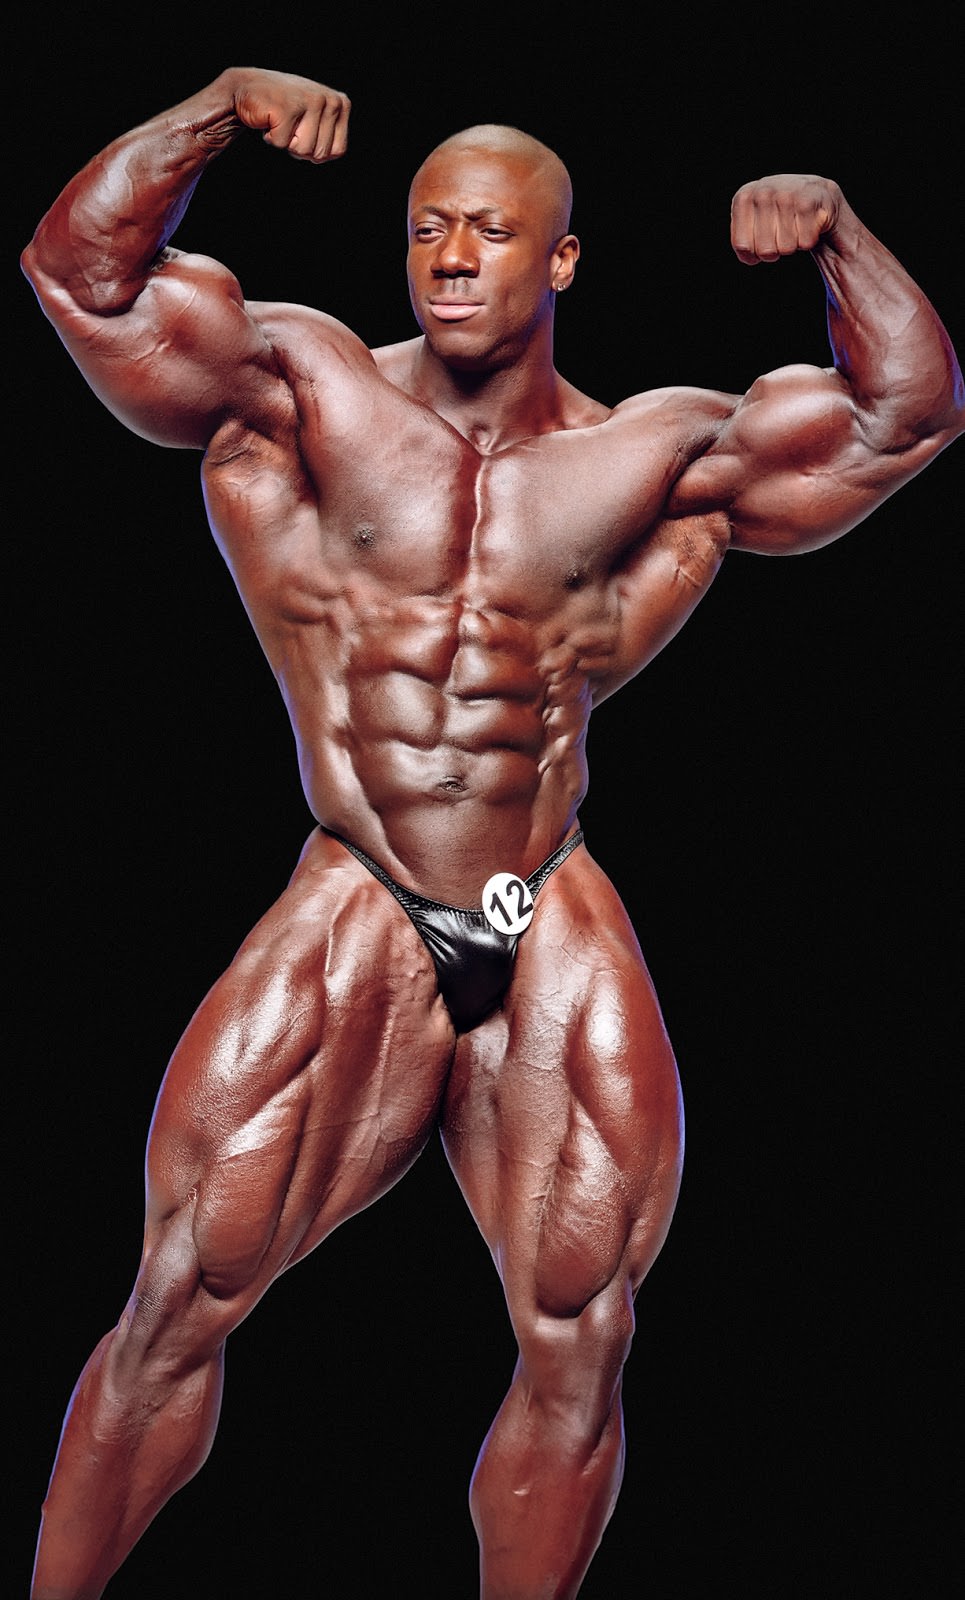 Shawn Rhoden is the new Olympia